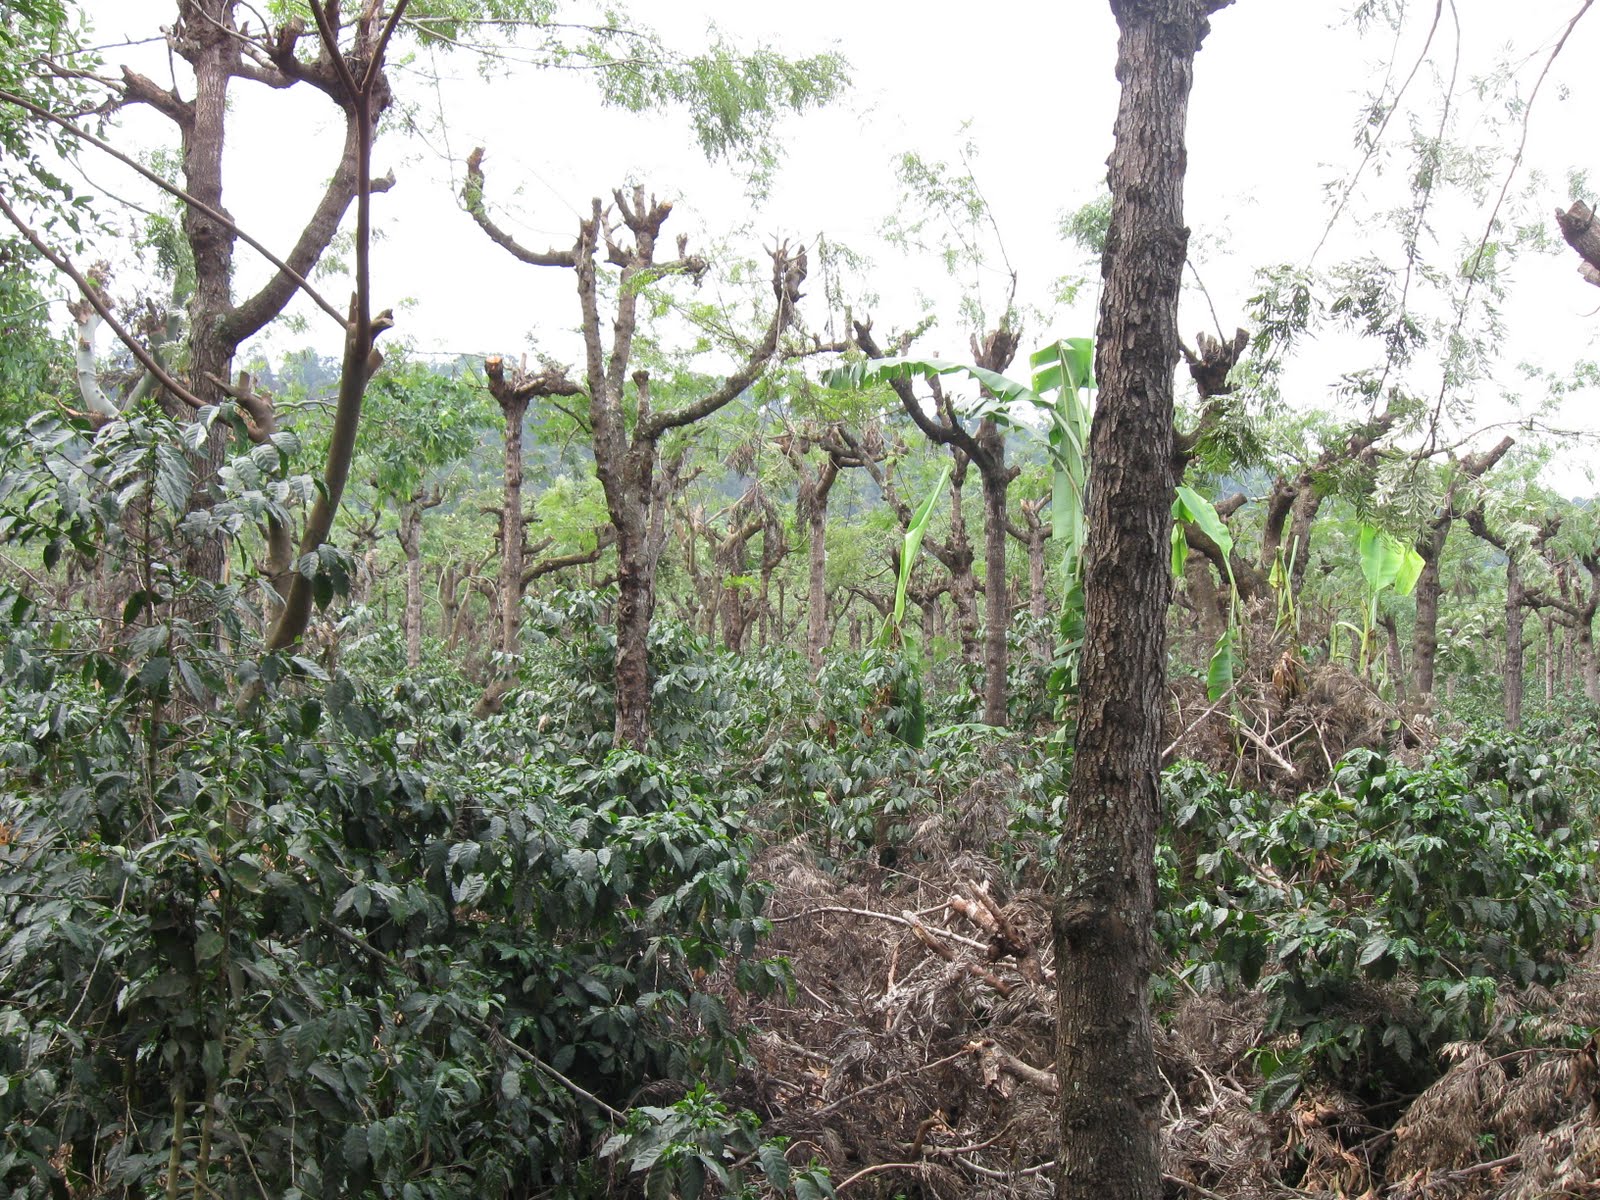 coffeeplantation.jpg - coffee plantation (the smaller coffee bushes grow in the shade of the trees)